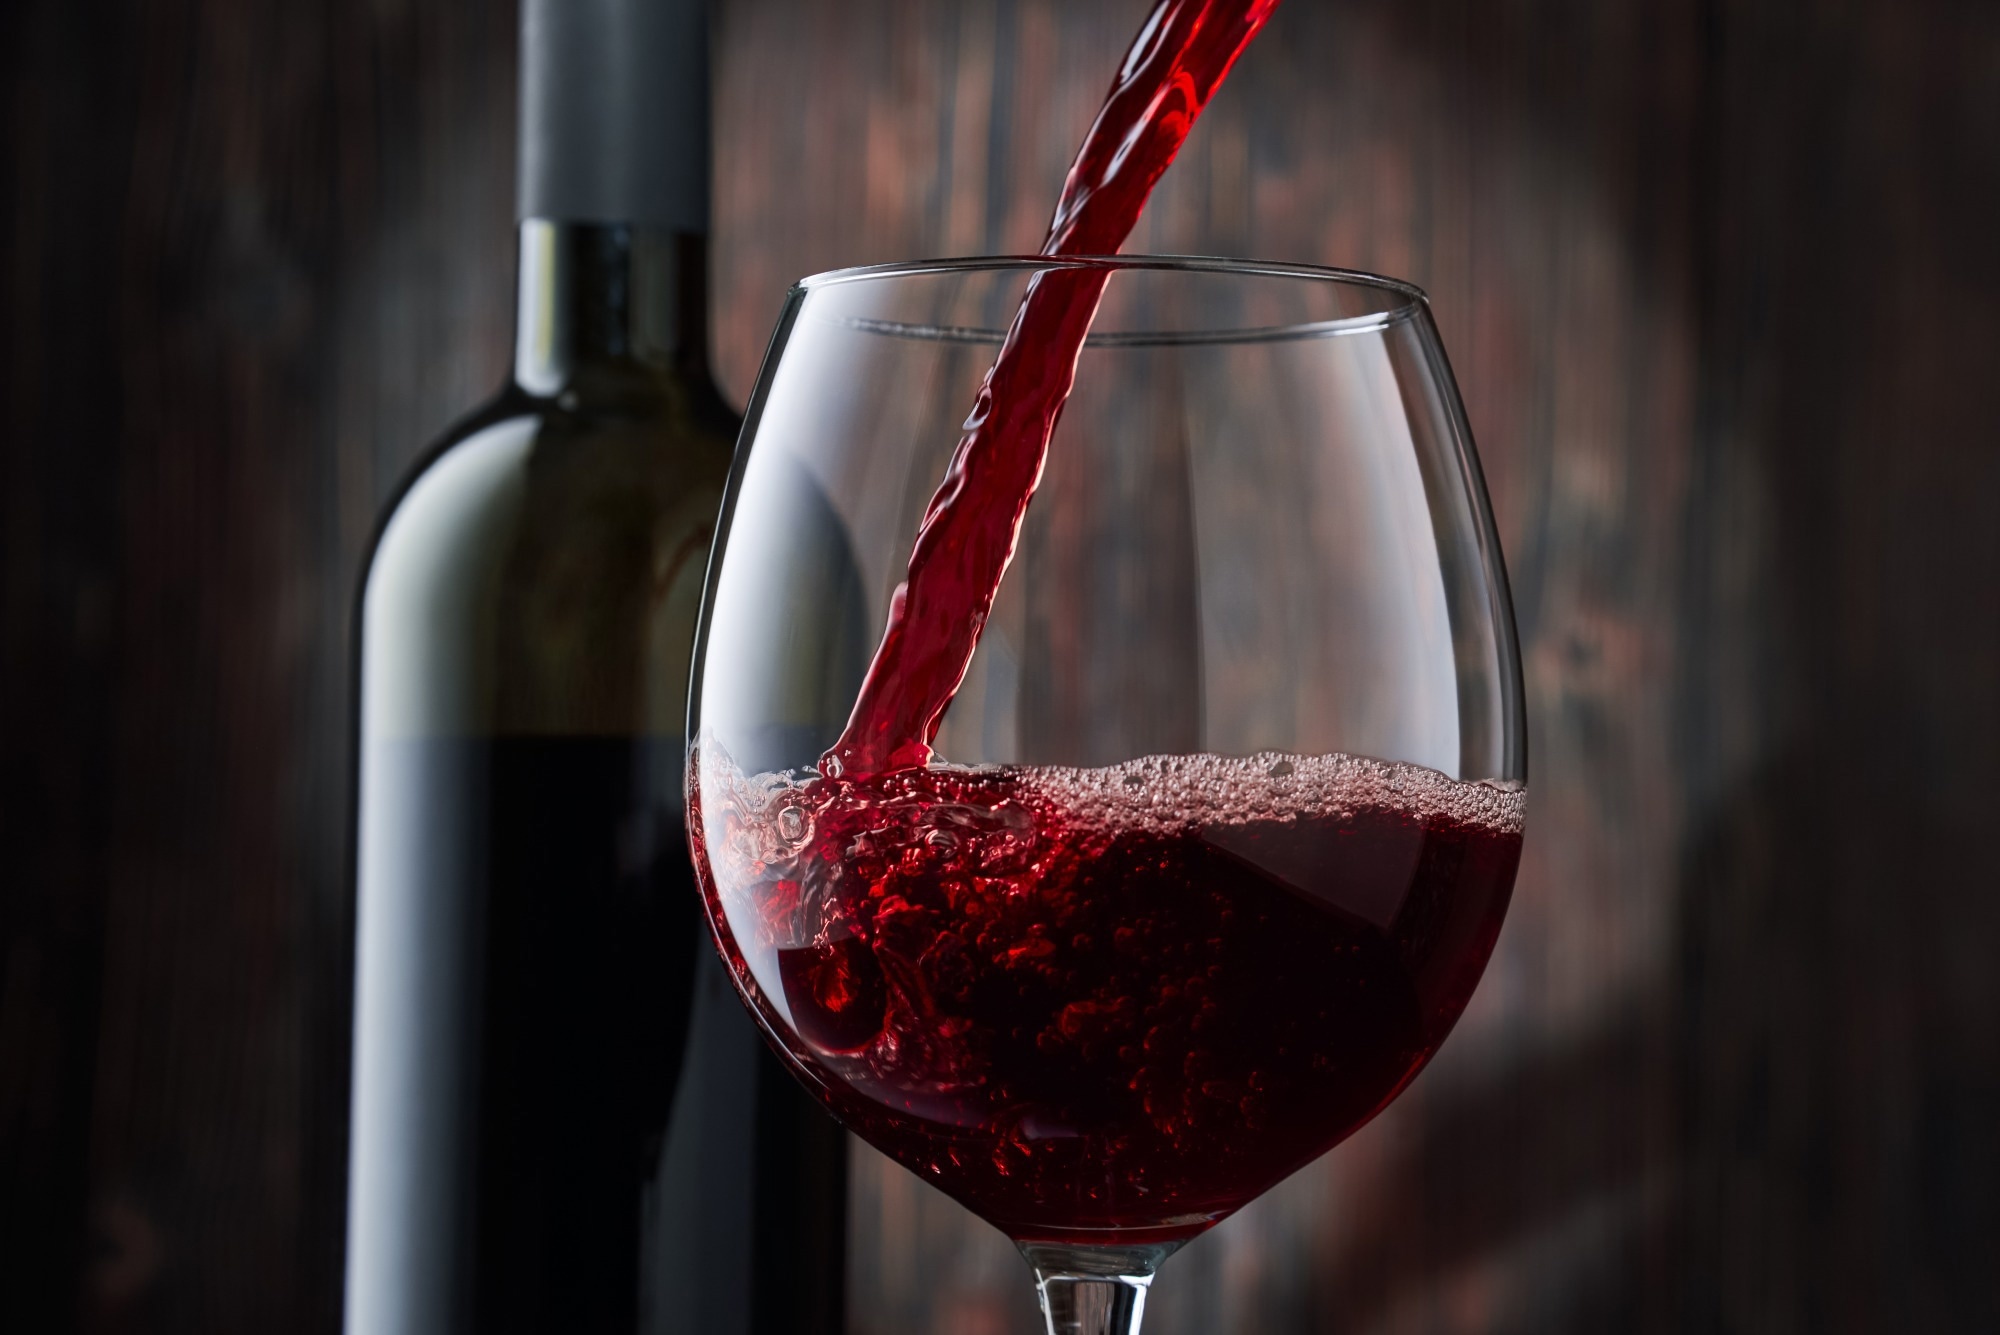 Study: Health Effects of Red Wine Consumption: A Narrative Review of an Issue That Still Deserves Debate. Image Credit: Alexander_Kuzmin/Shutterstock.com